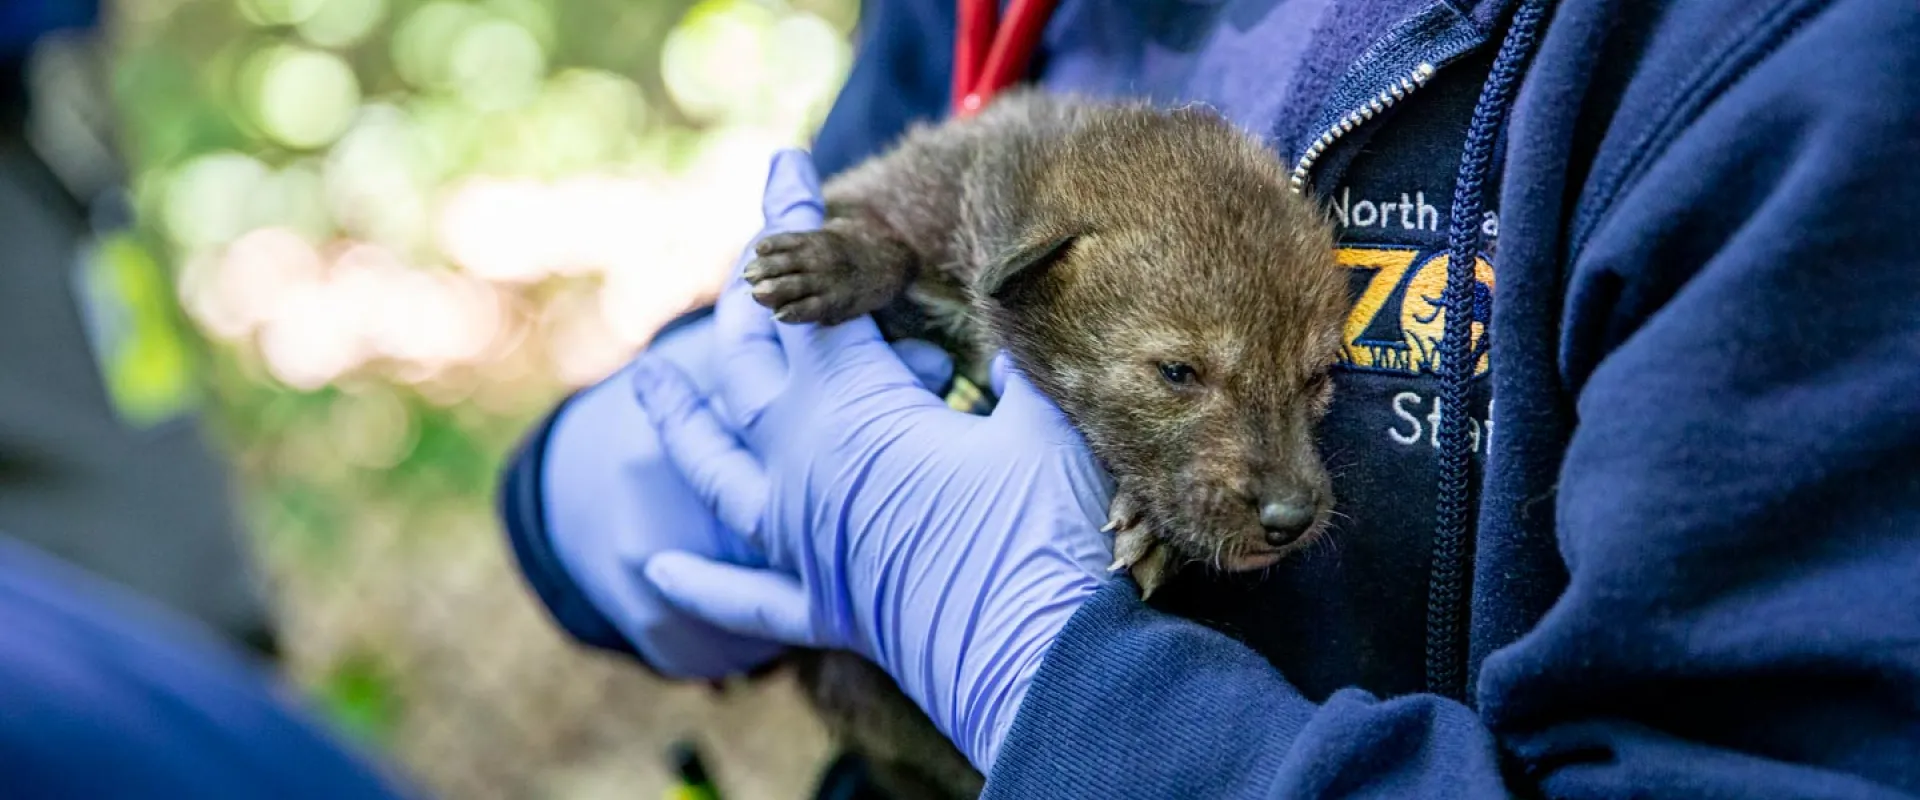 North Carolina Zoo Asks Public to Vote on Names of American Red Wolf Pups